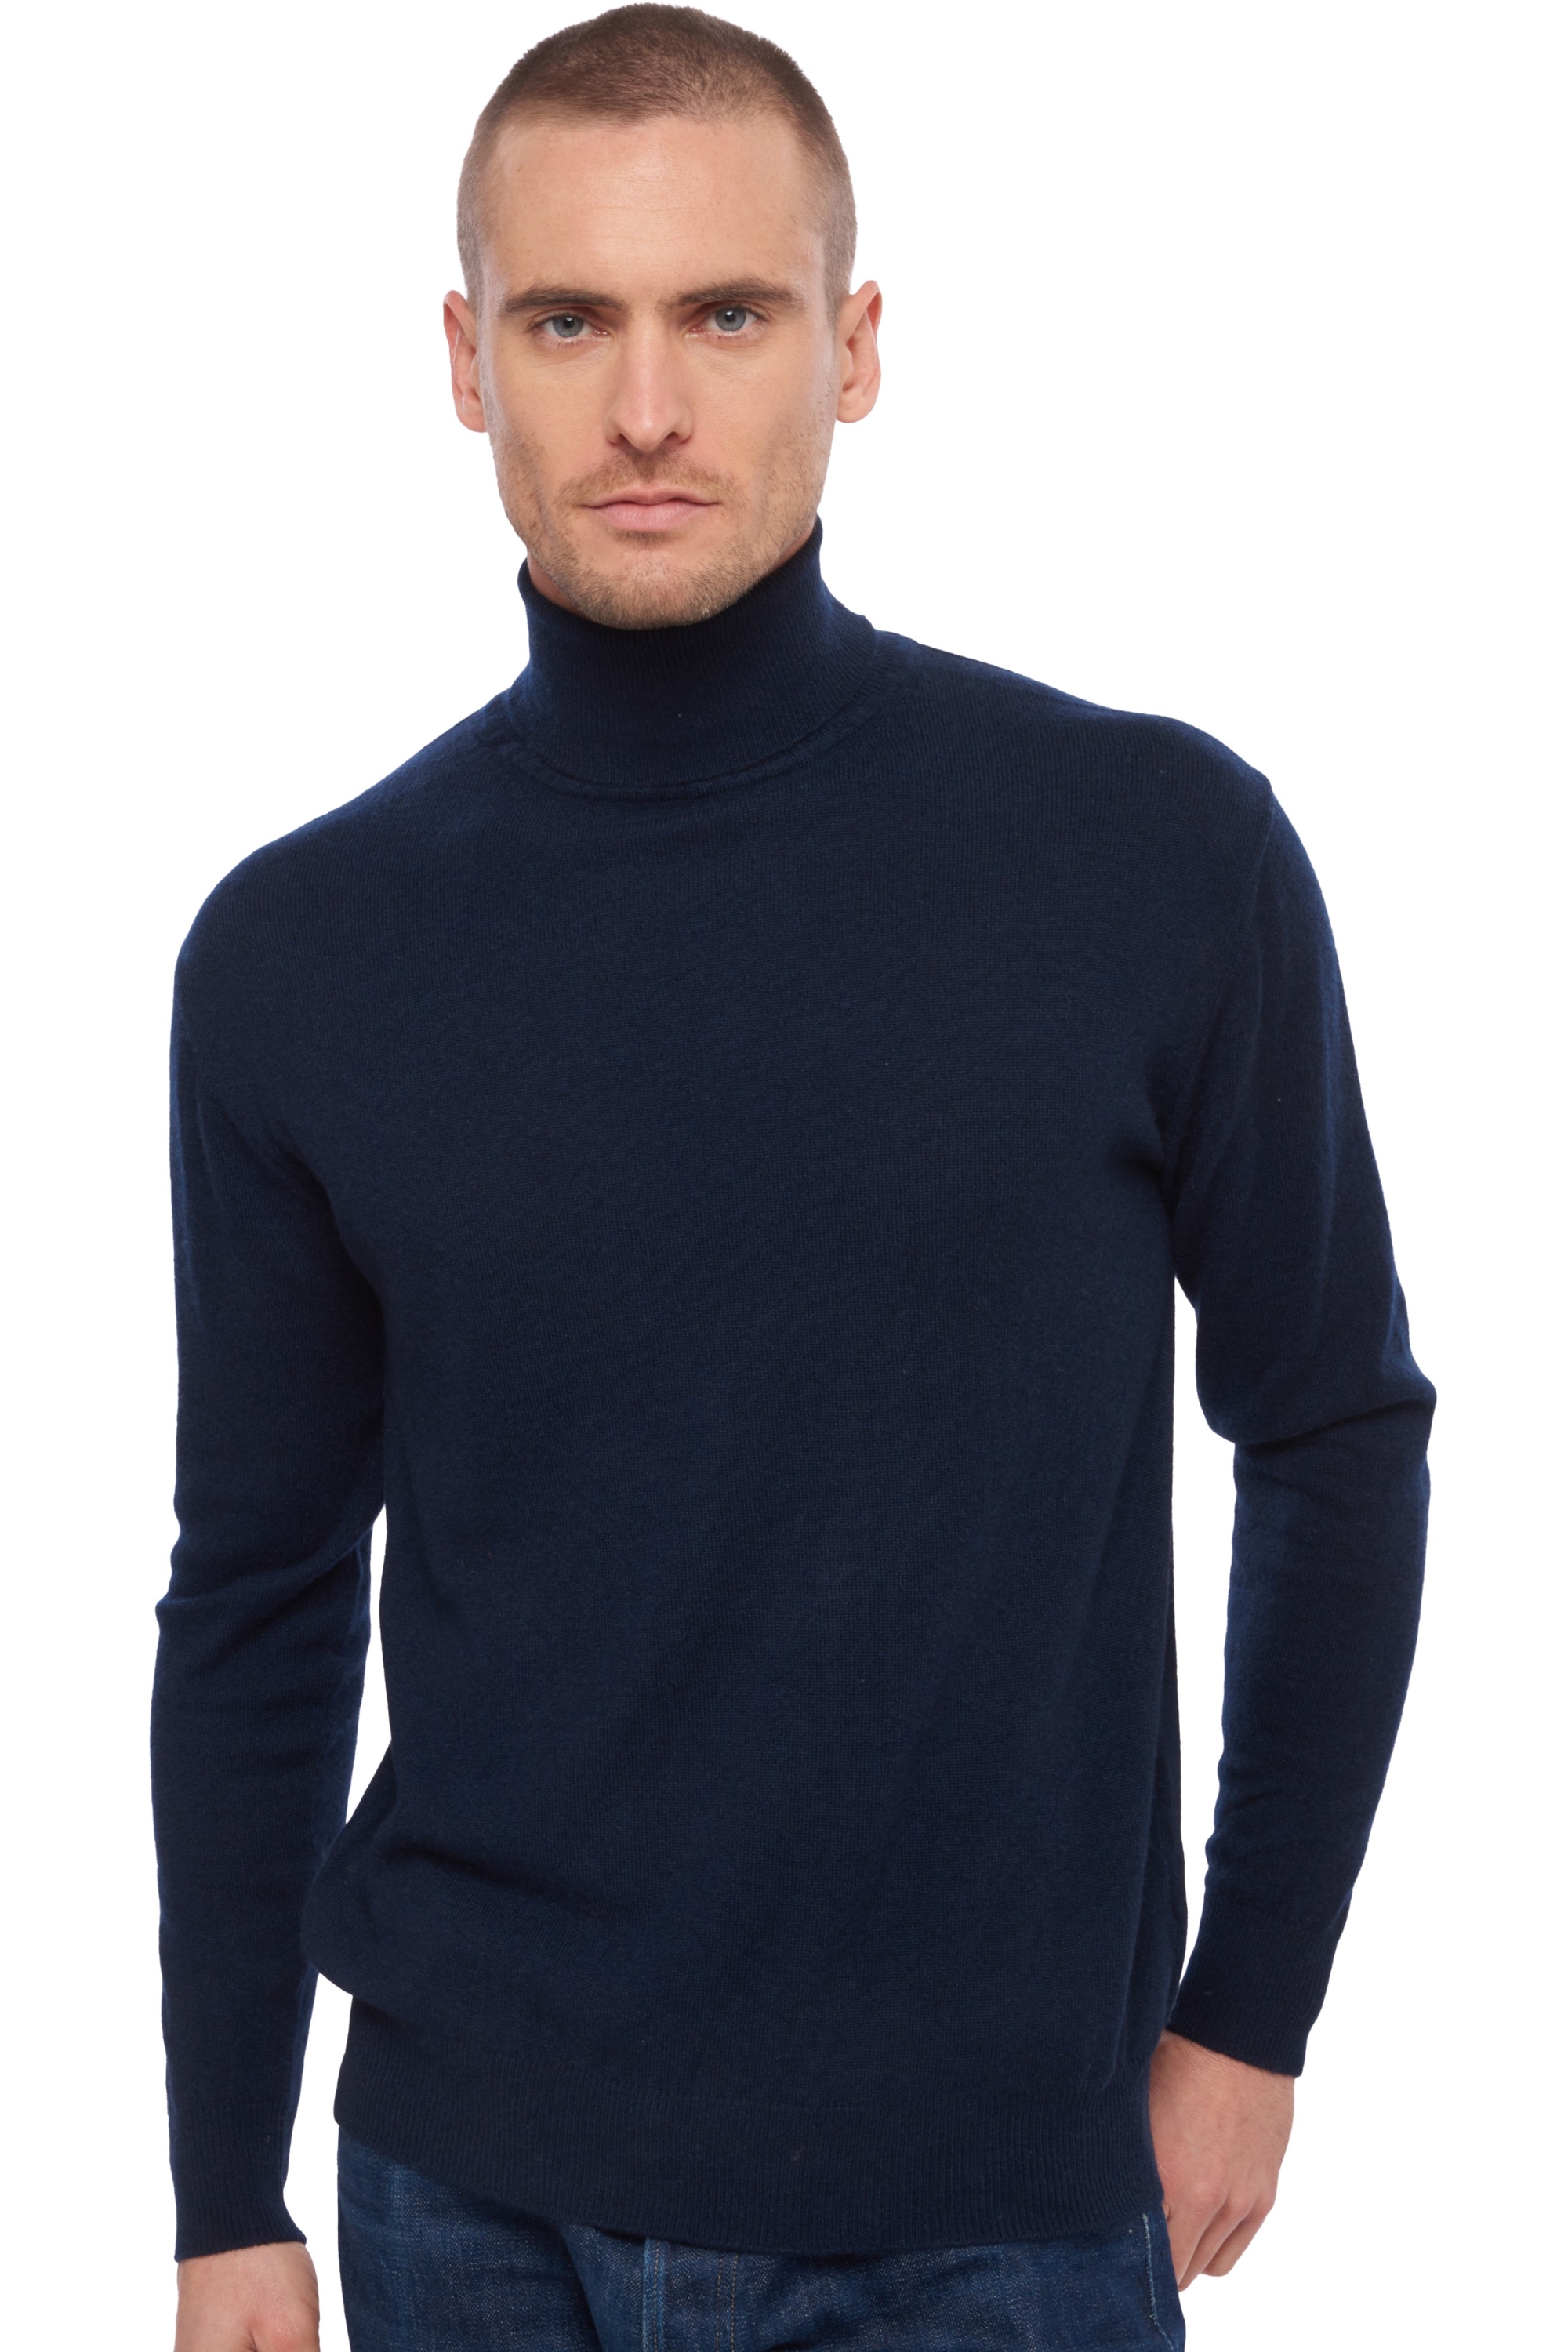 Cachemire pull homme col roule edgar marine fonce xl